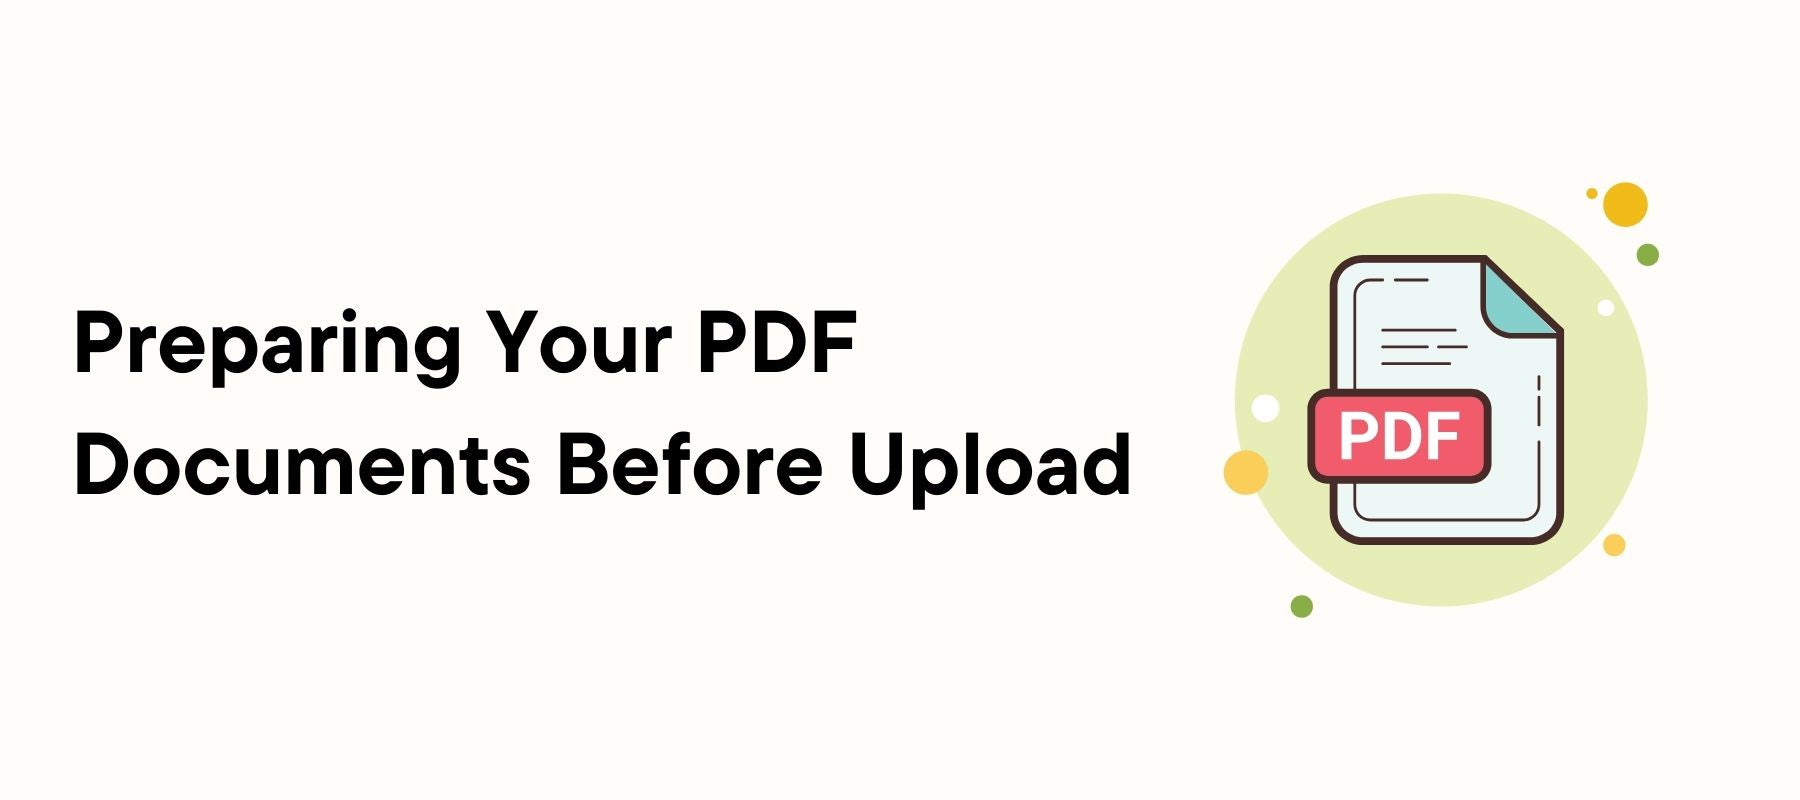 Preparing Your PDF Documents Before Upload